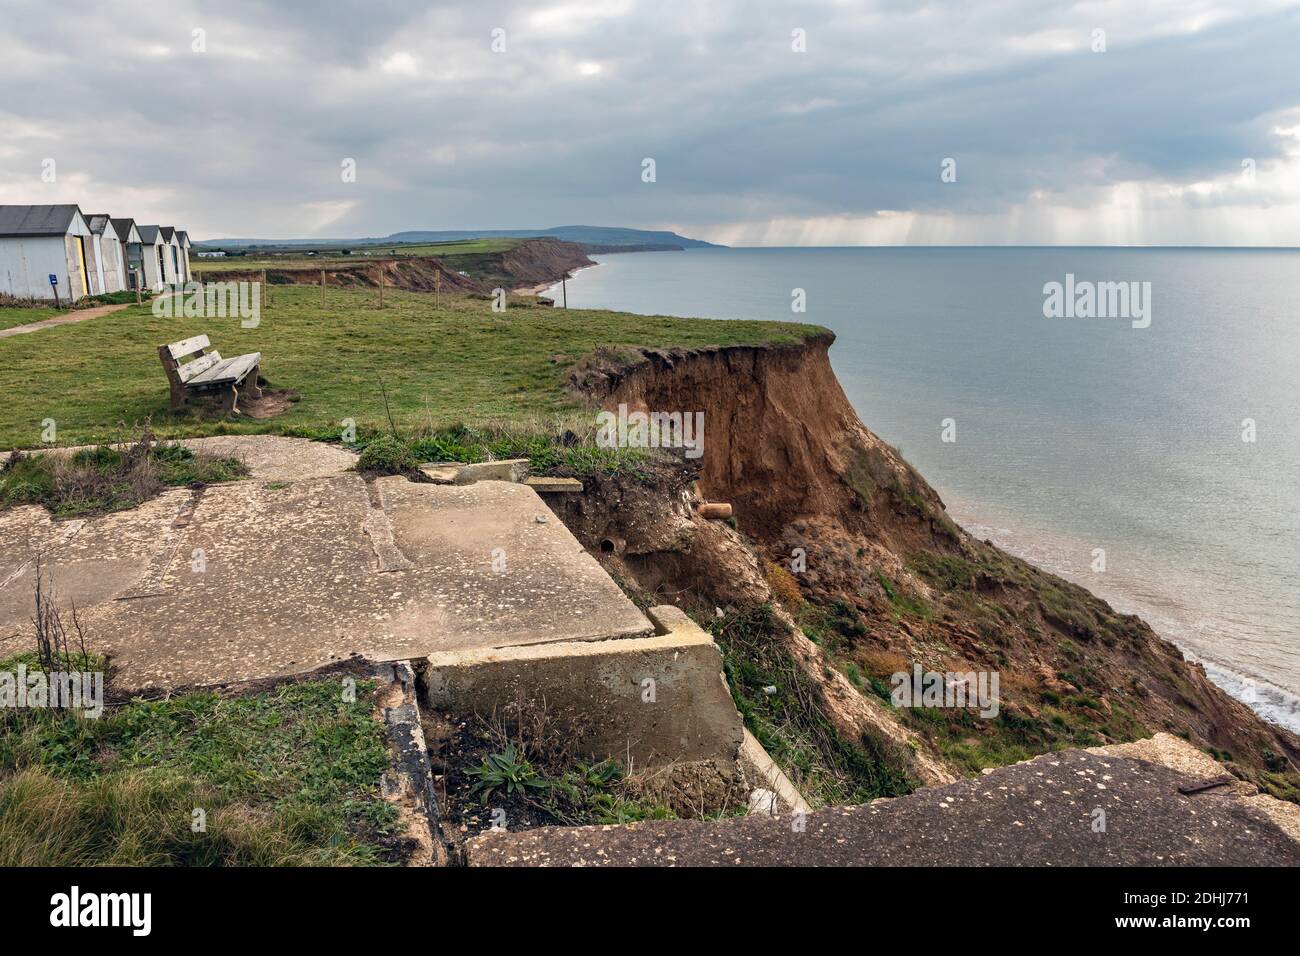 Cliff erosion and abandoned holiday chalets at Brighstone Bay, Isle of Wiight Stock Photo